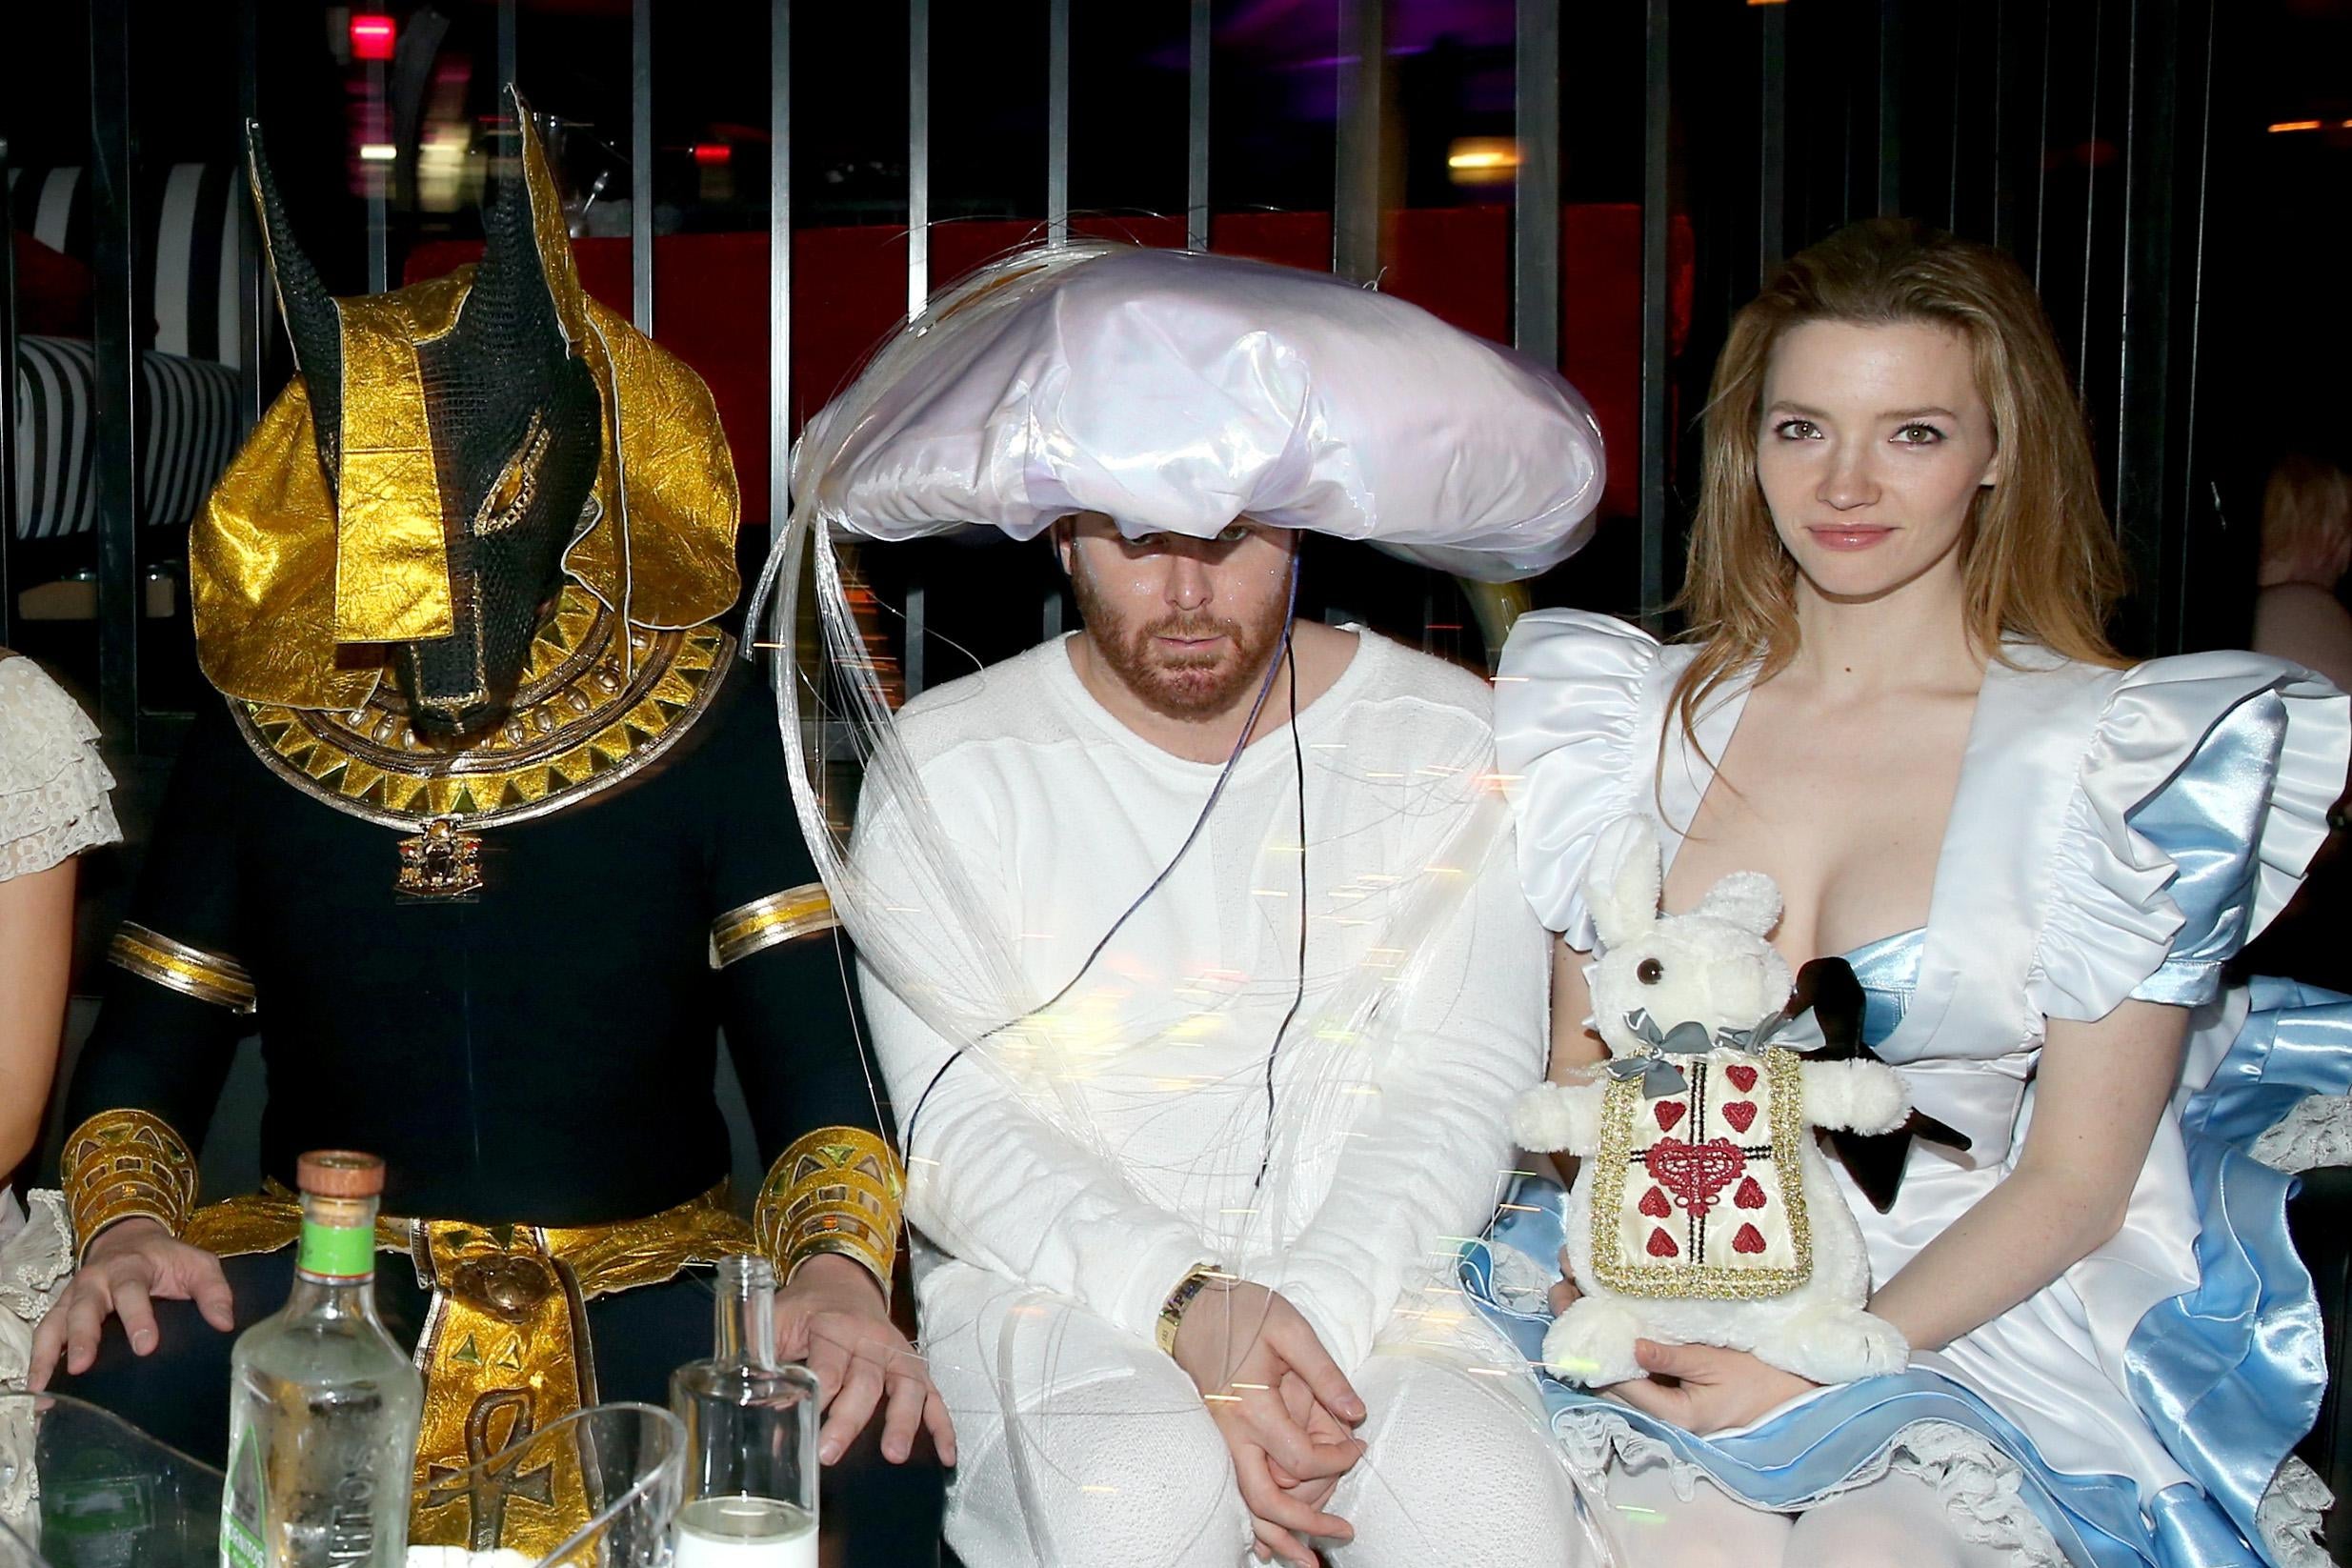 Three people wearing costumes sitting next to each other: one is dressed like an ancient Egyptian deity, one is dressed in all white with a large puffy white hat, and one is dressed like Alice in Wonderland.